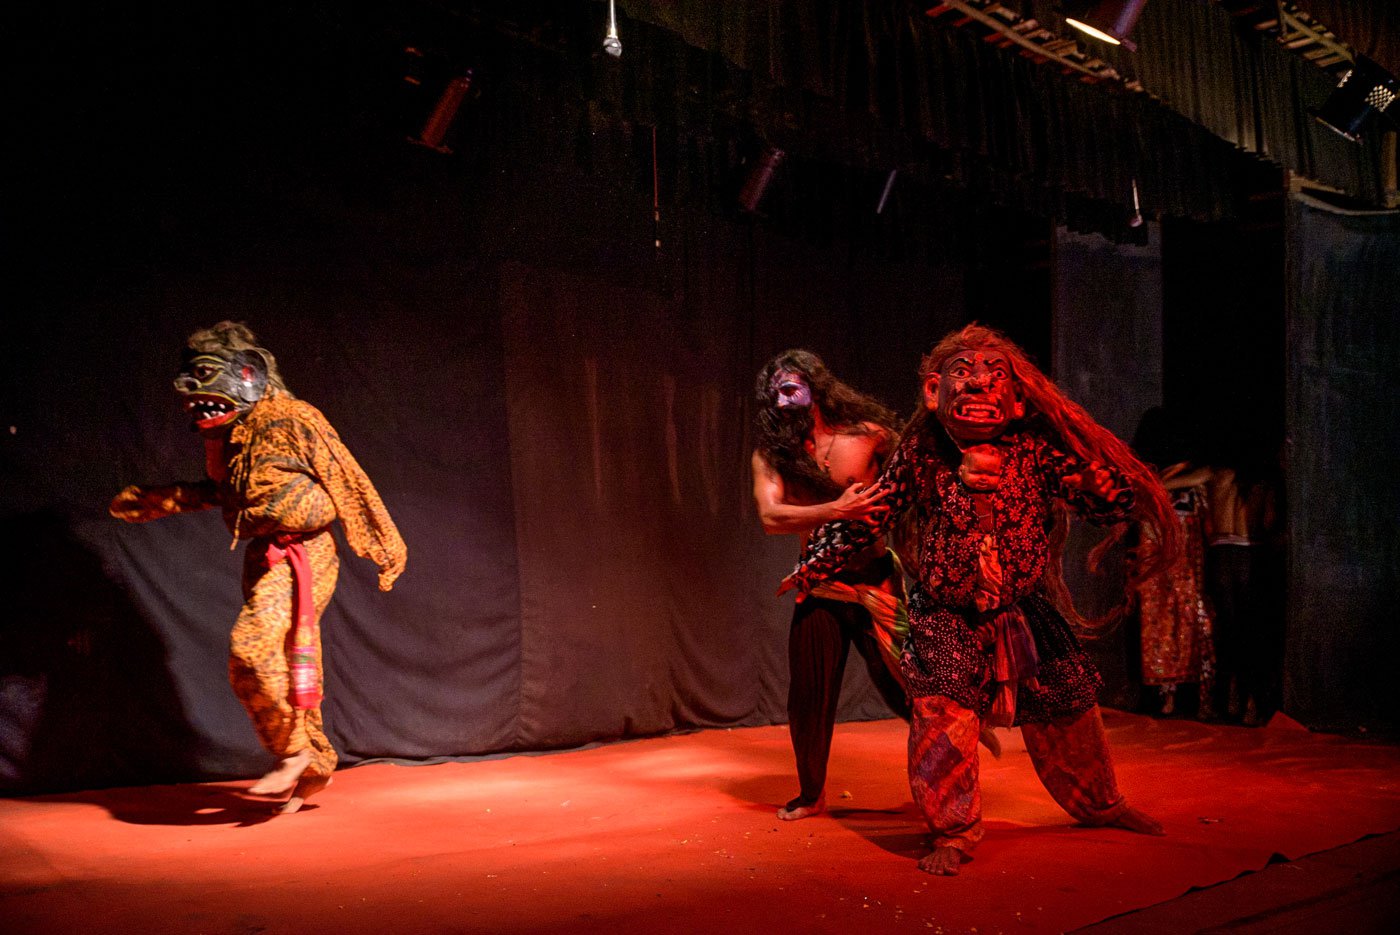 The masks used in the performances and the process of making them are an integral part of the Raas Mahotsav. Here, actors step onto the stage in masks made for the roles of asuras and danabs